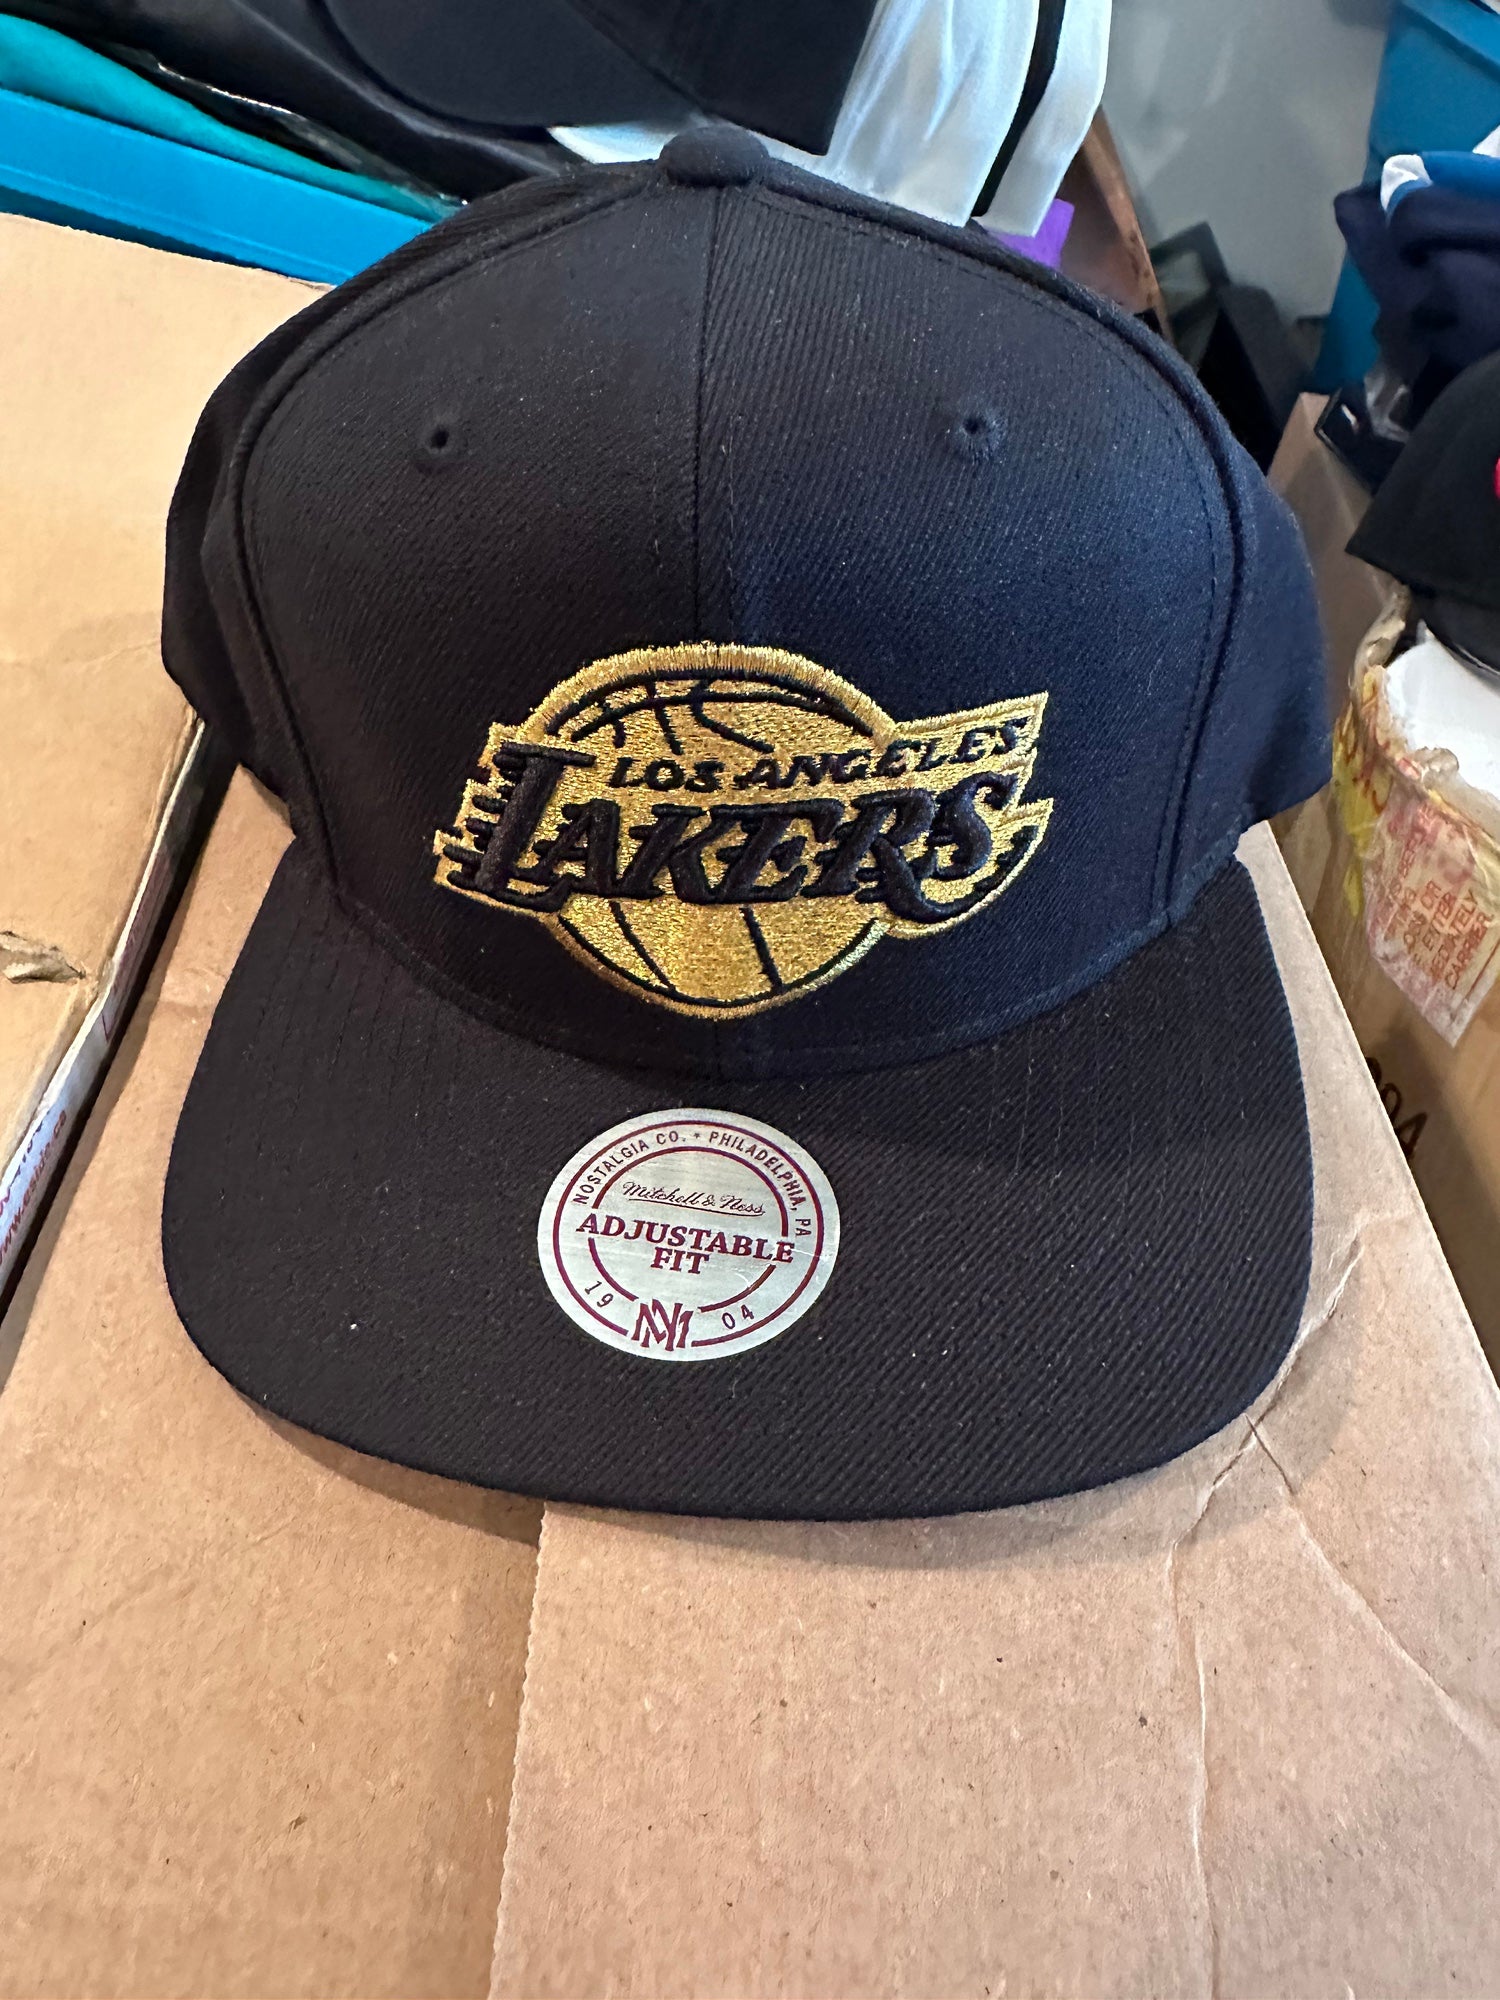 Los Angeles Lakers Hat Nwt